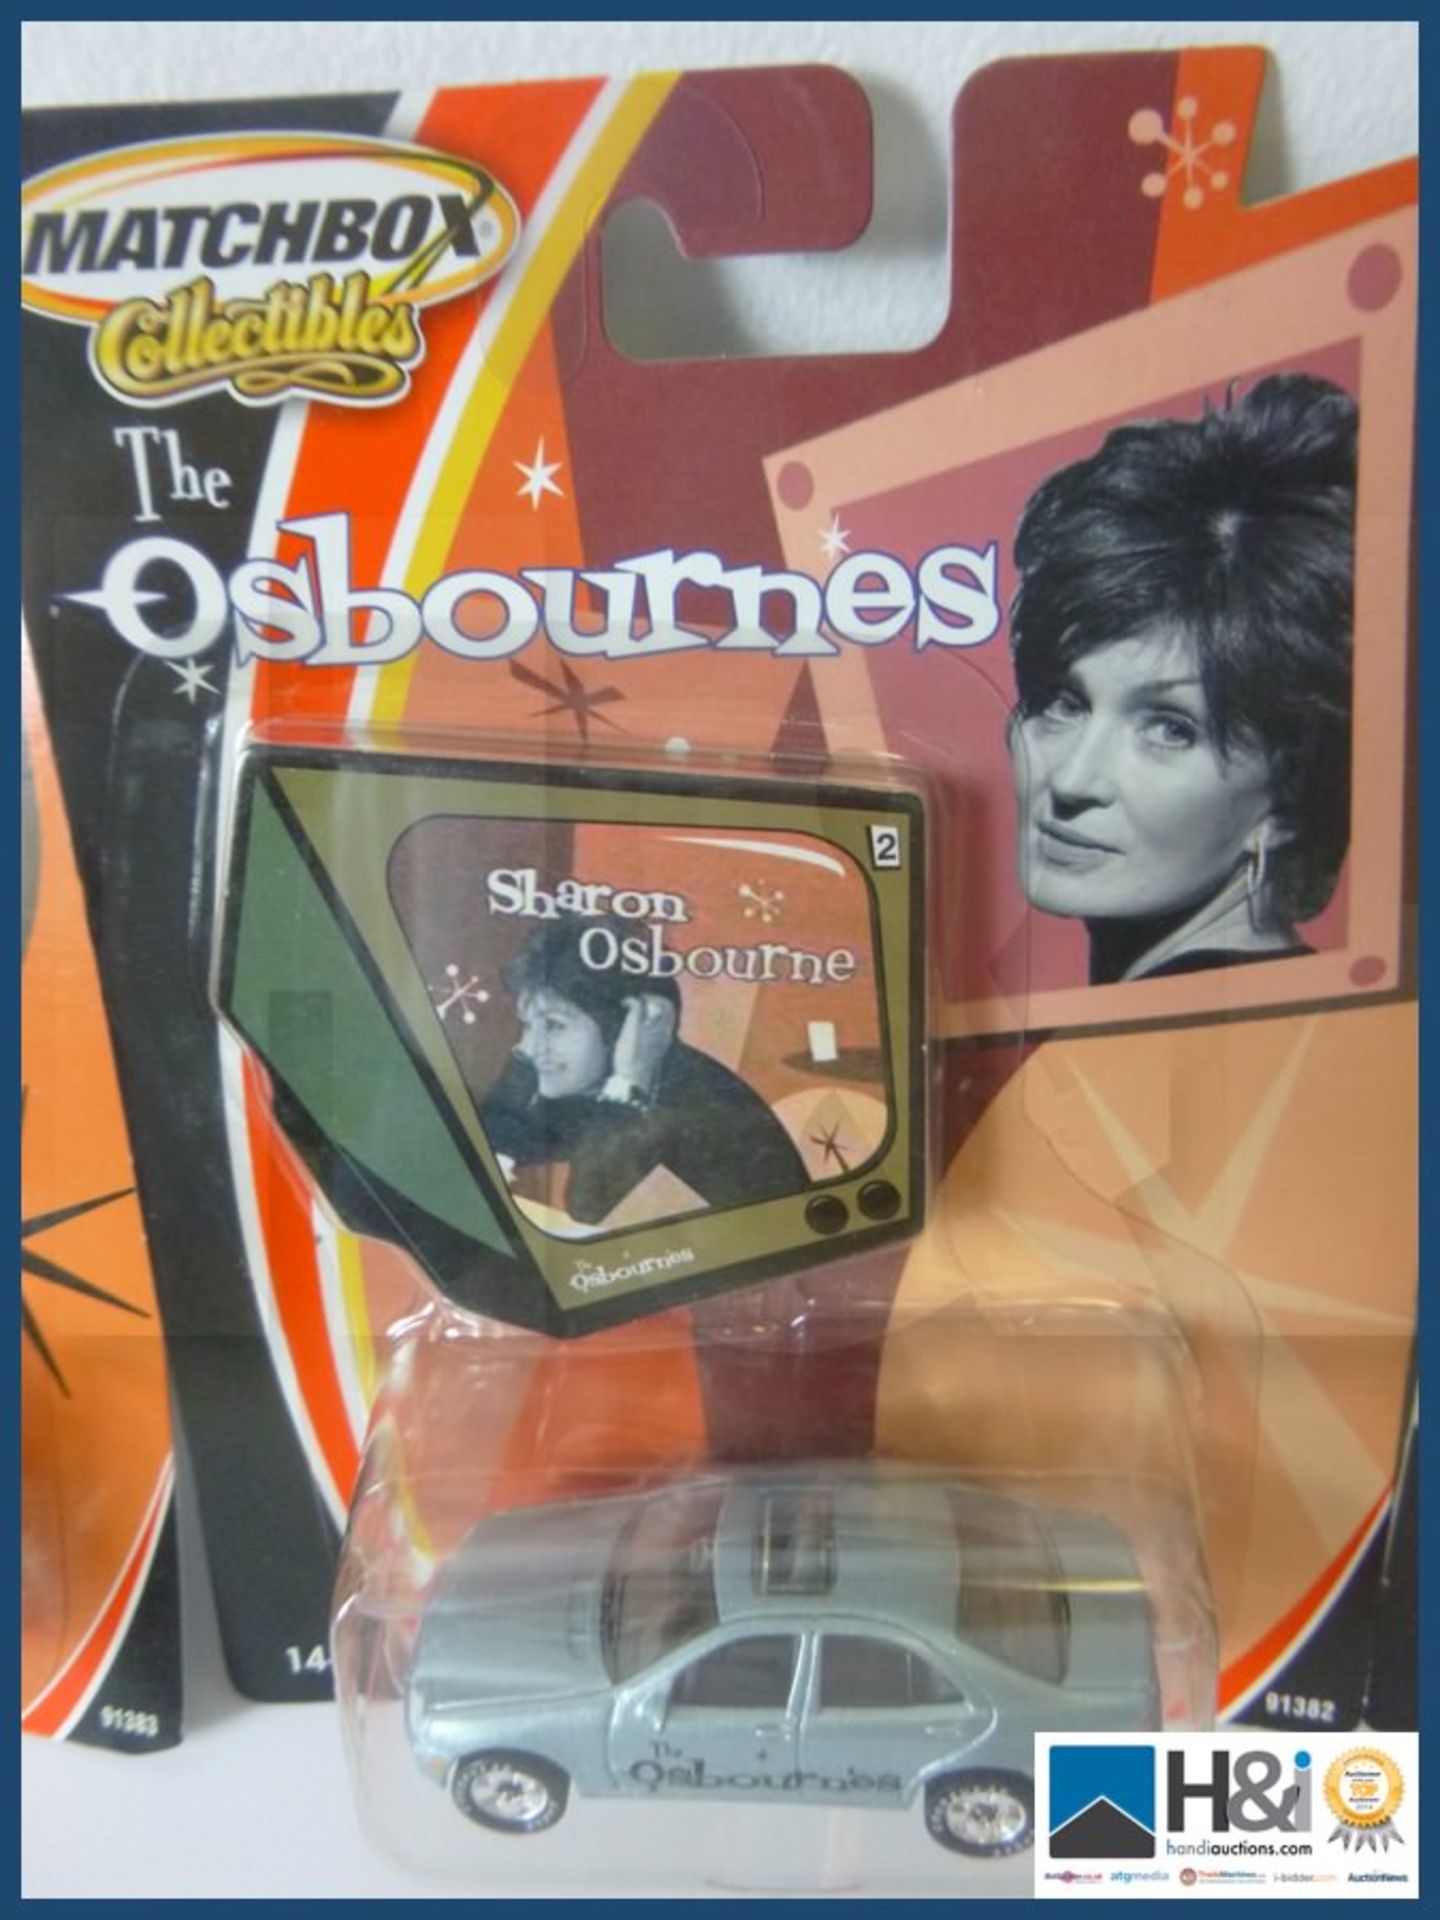 X4 Matchbox collectables The osbournes. - Image 3 of 5